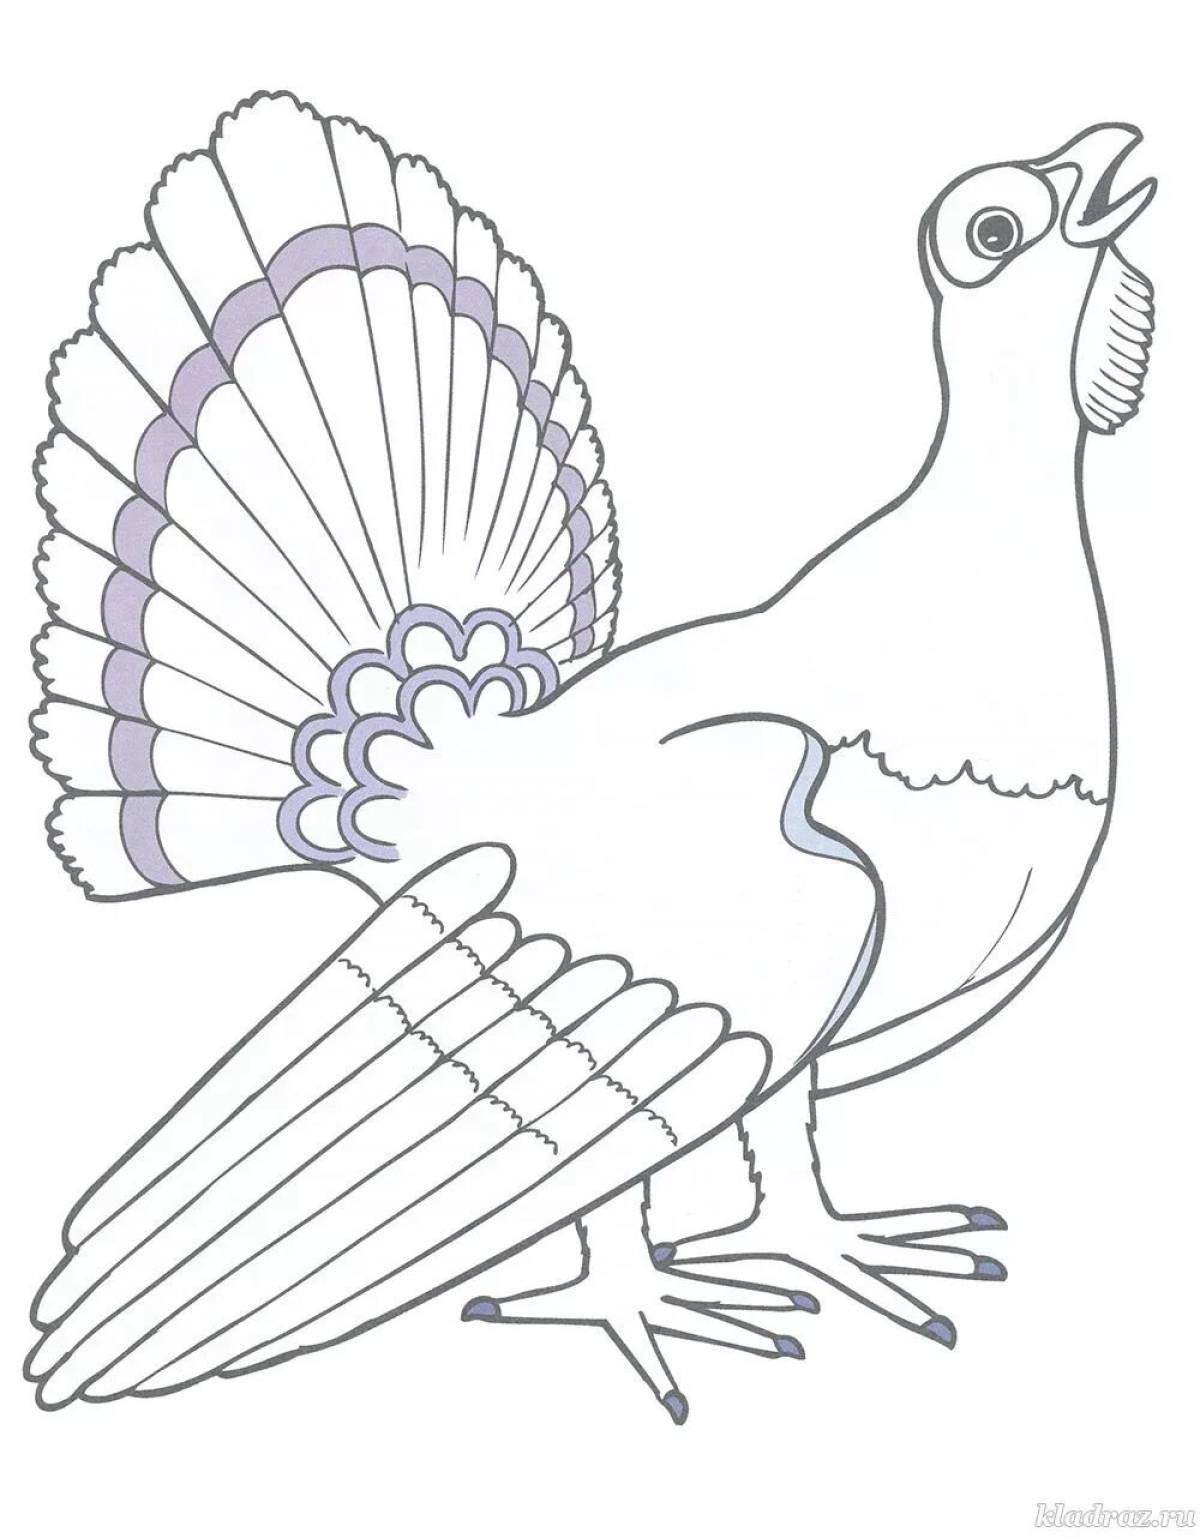 Unusual black grouse coloring pages for kids